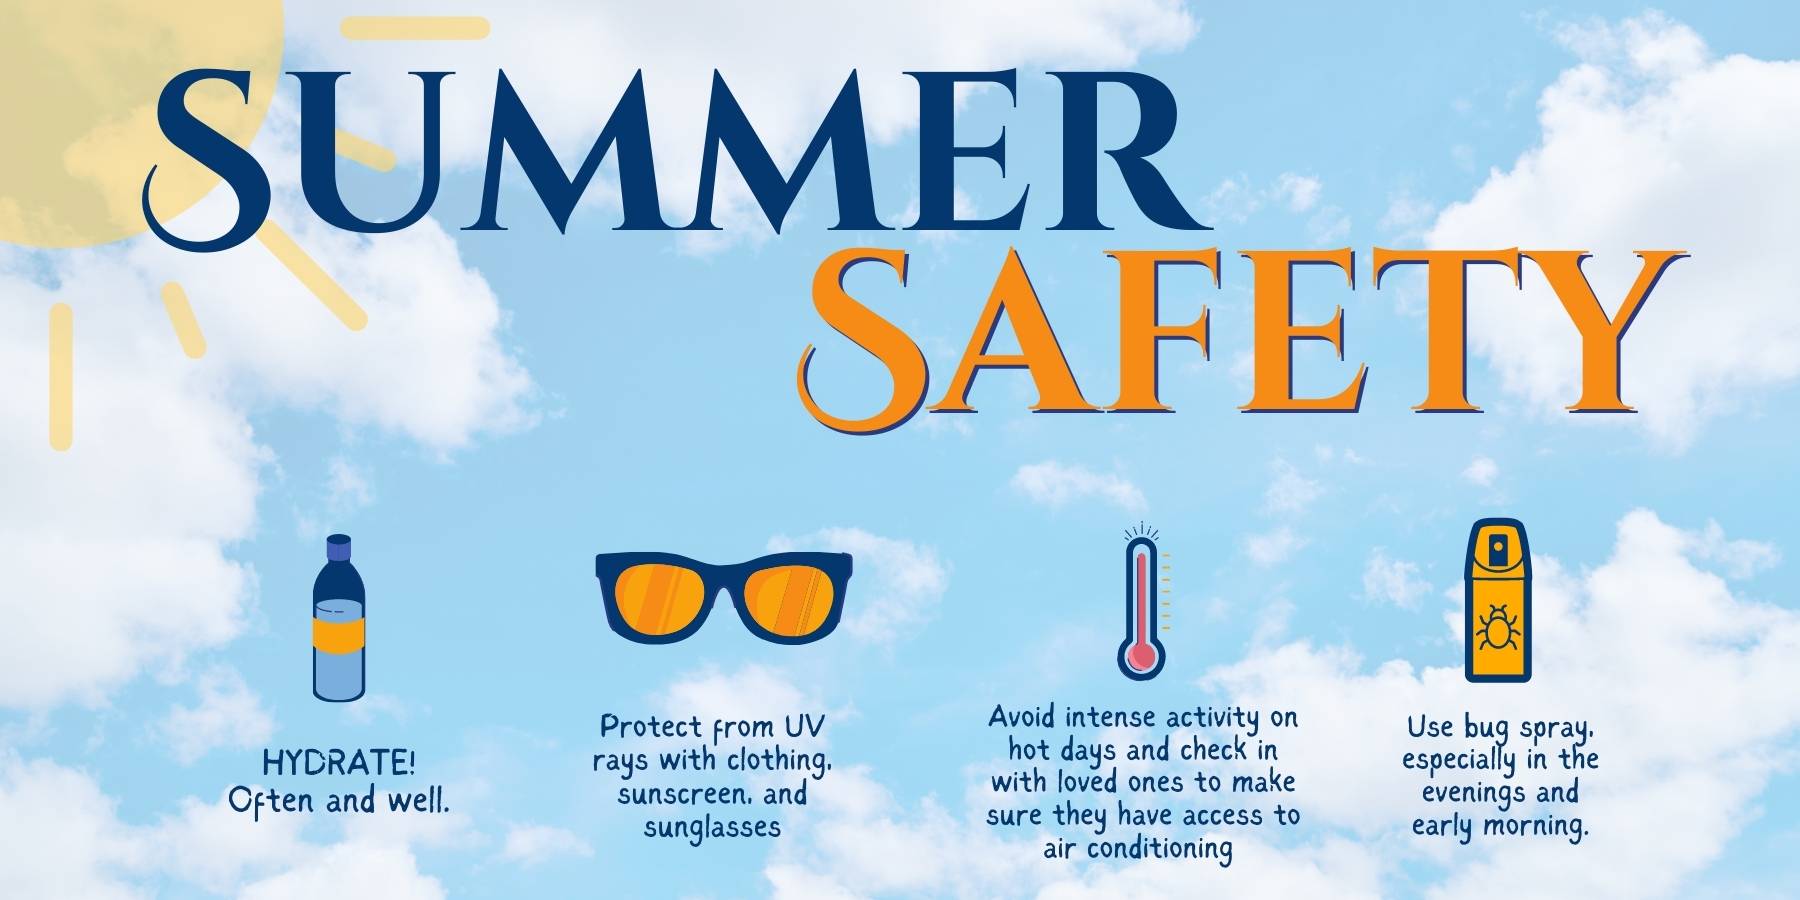 Slide linking to the Summer Safety page